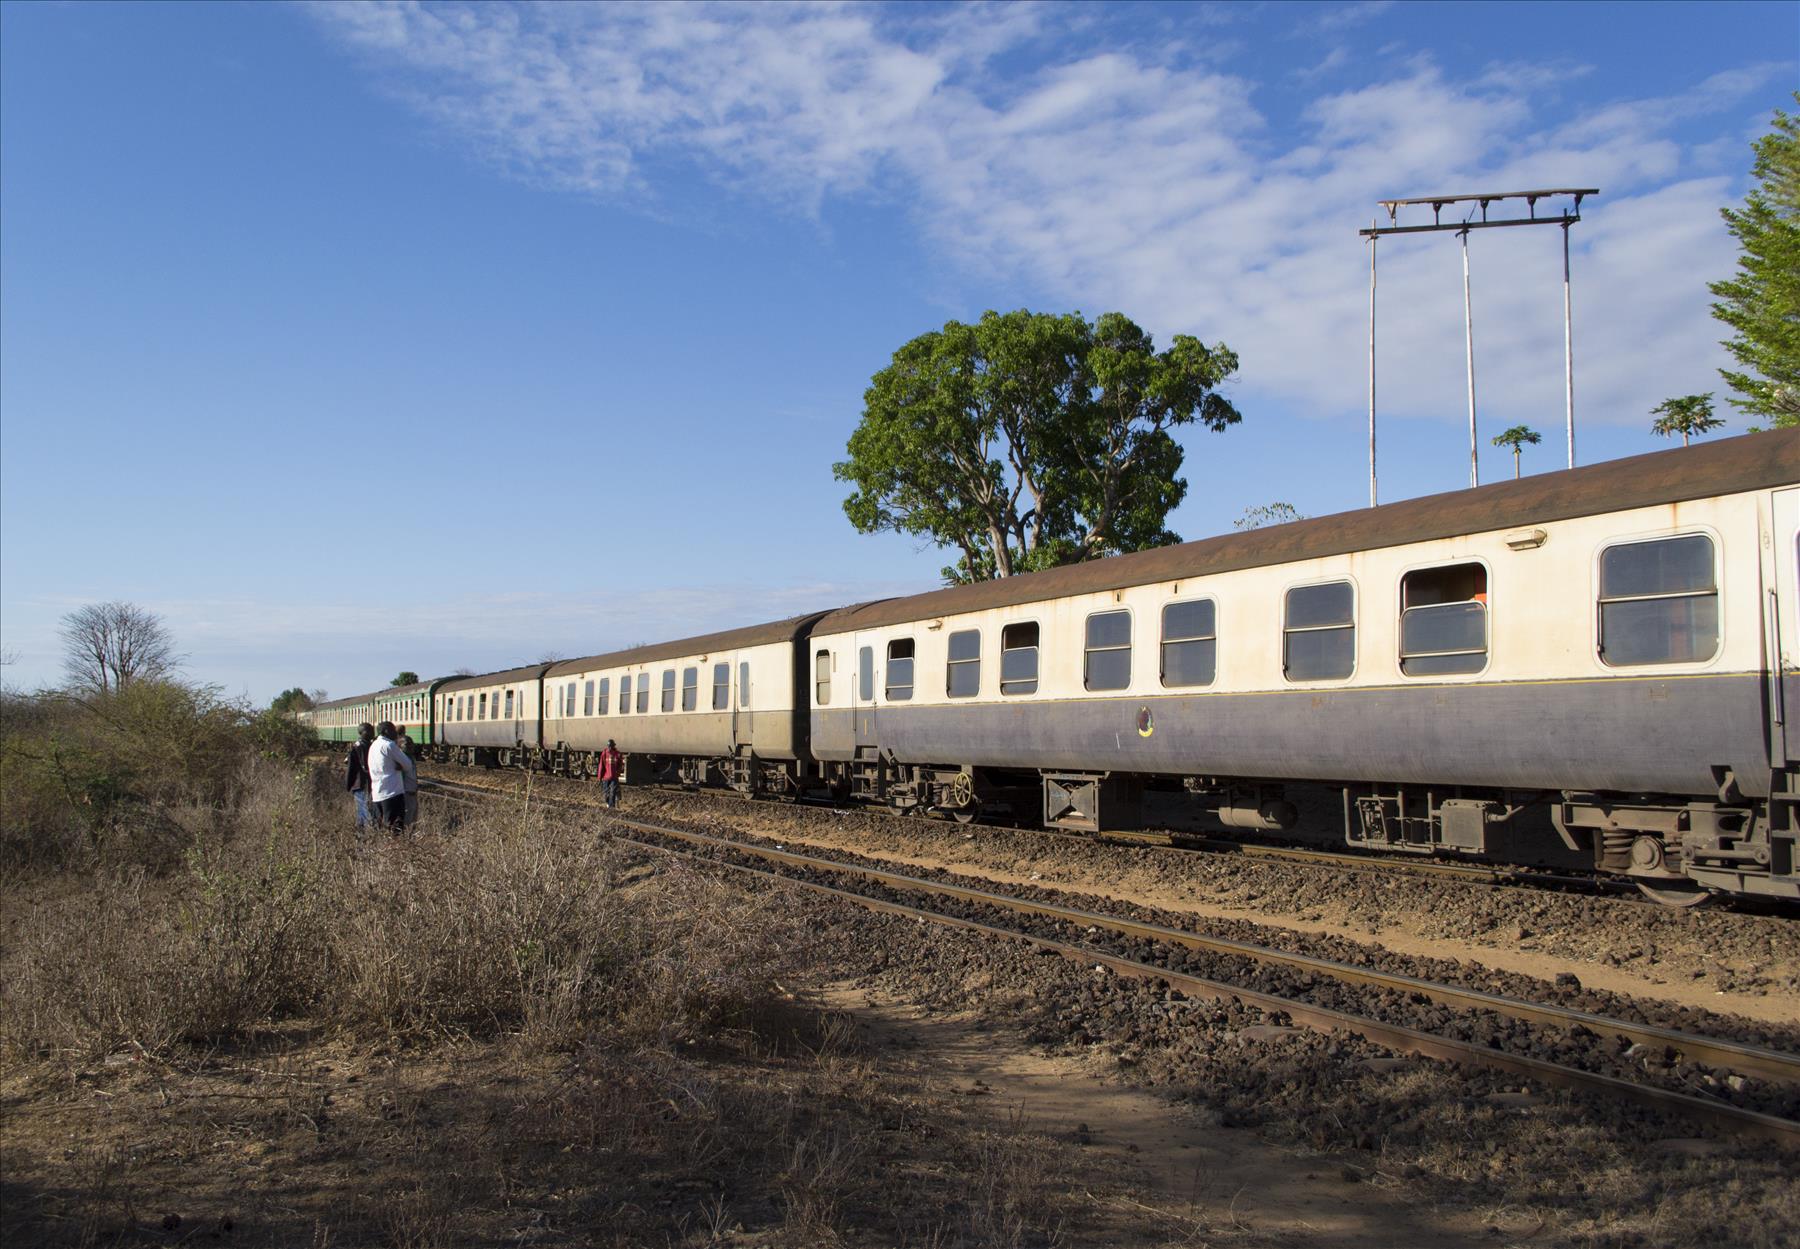 The Lunatic Express: Contribution of the Uganda Railway to the port and socio-economic development of Kenya and East Africa